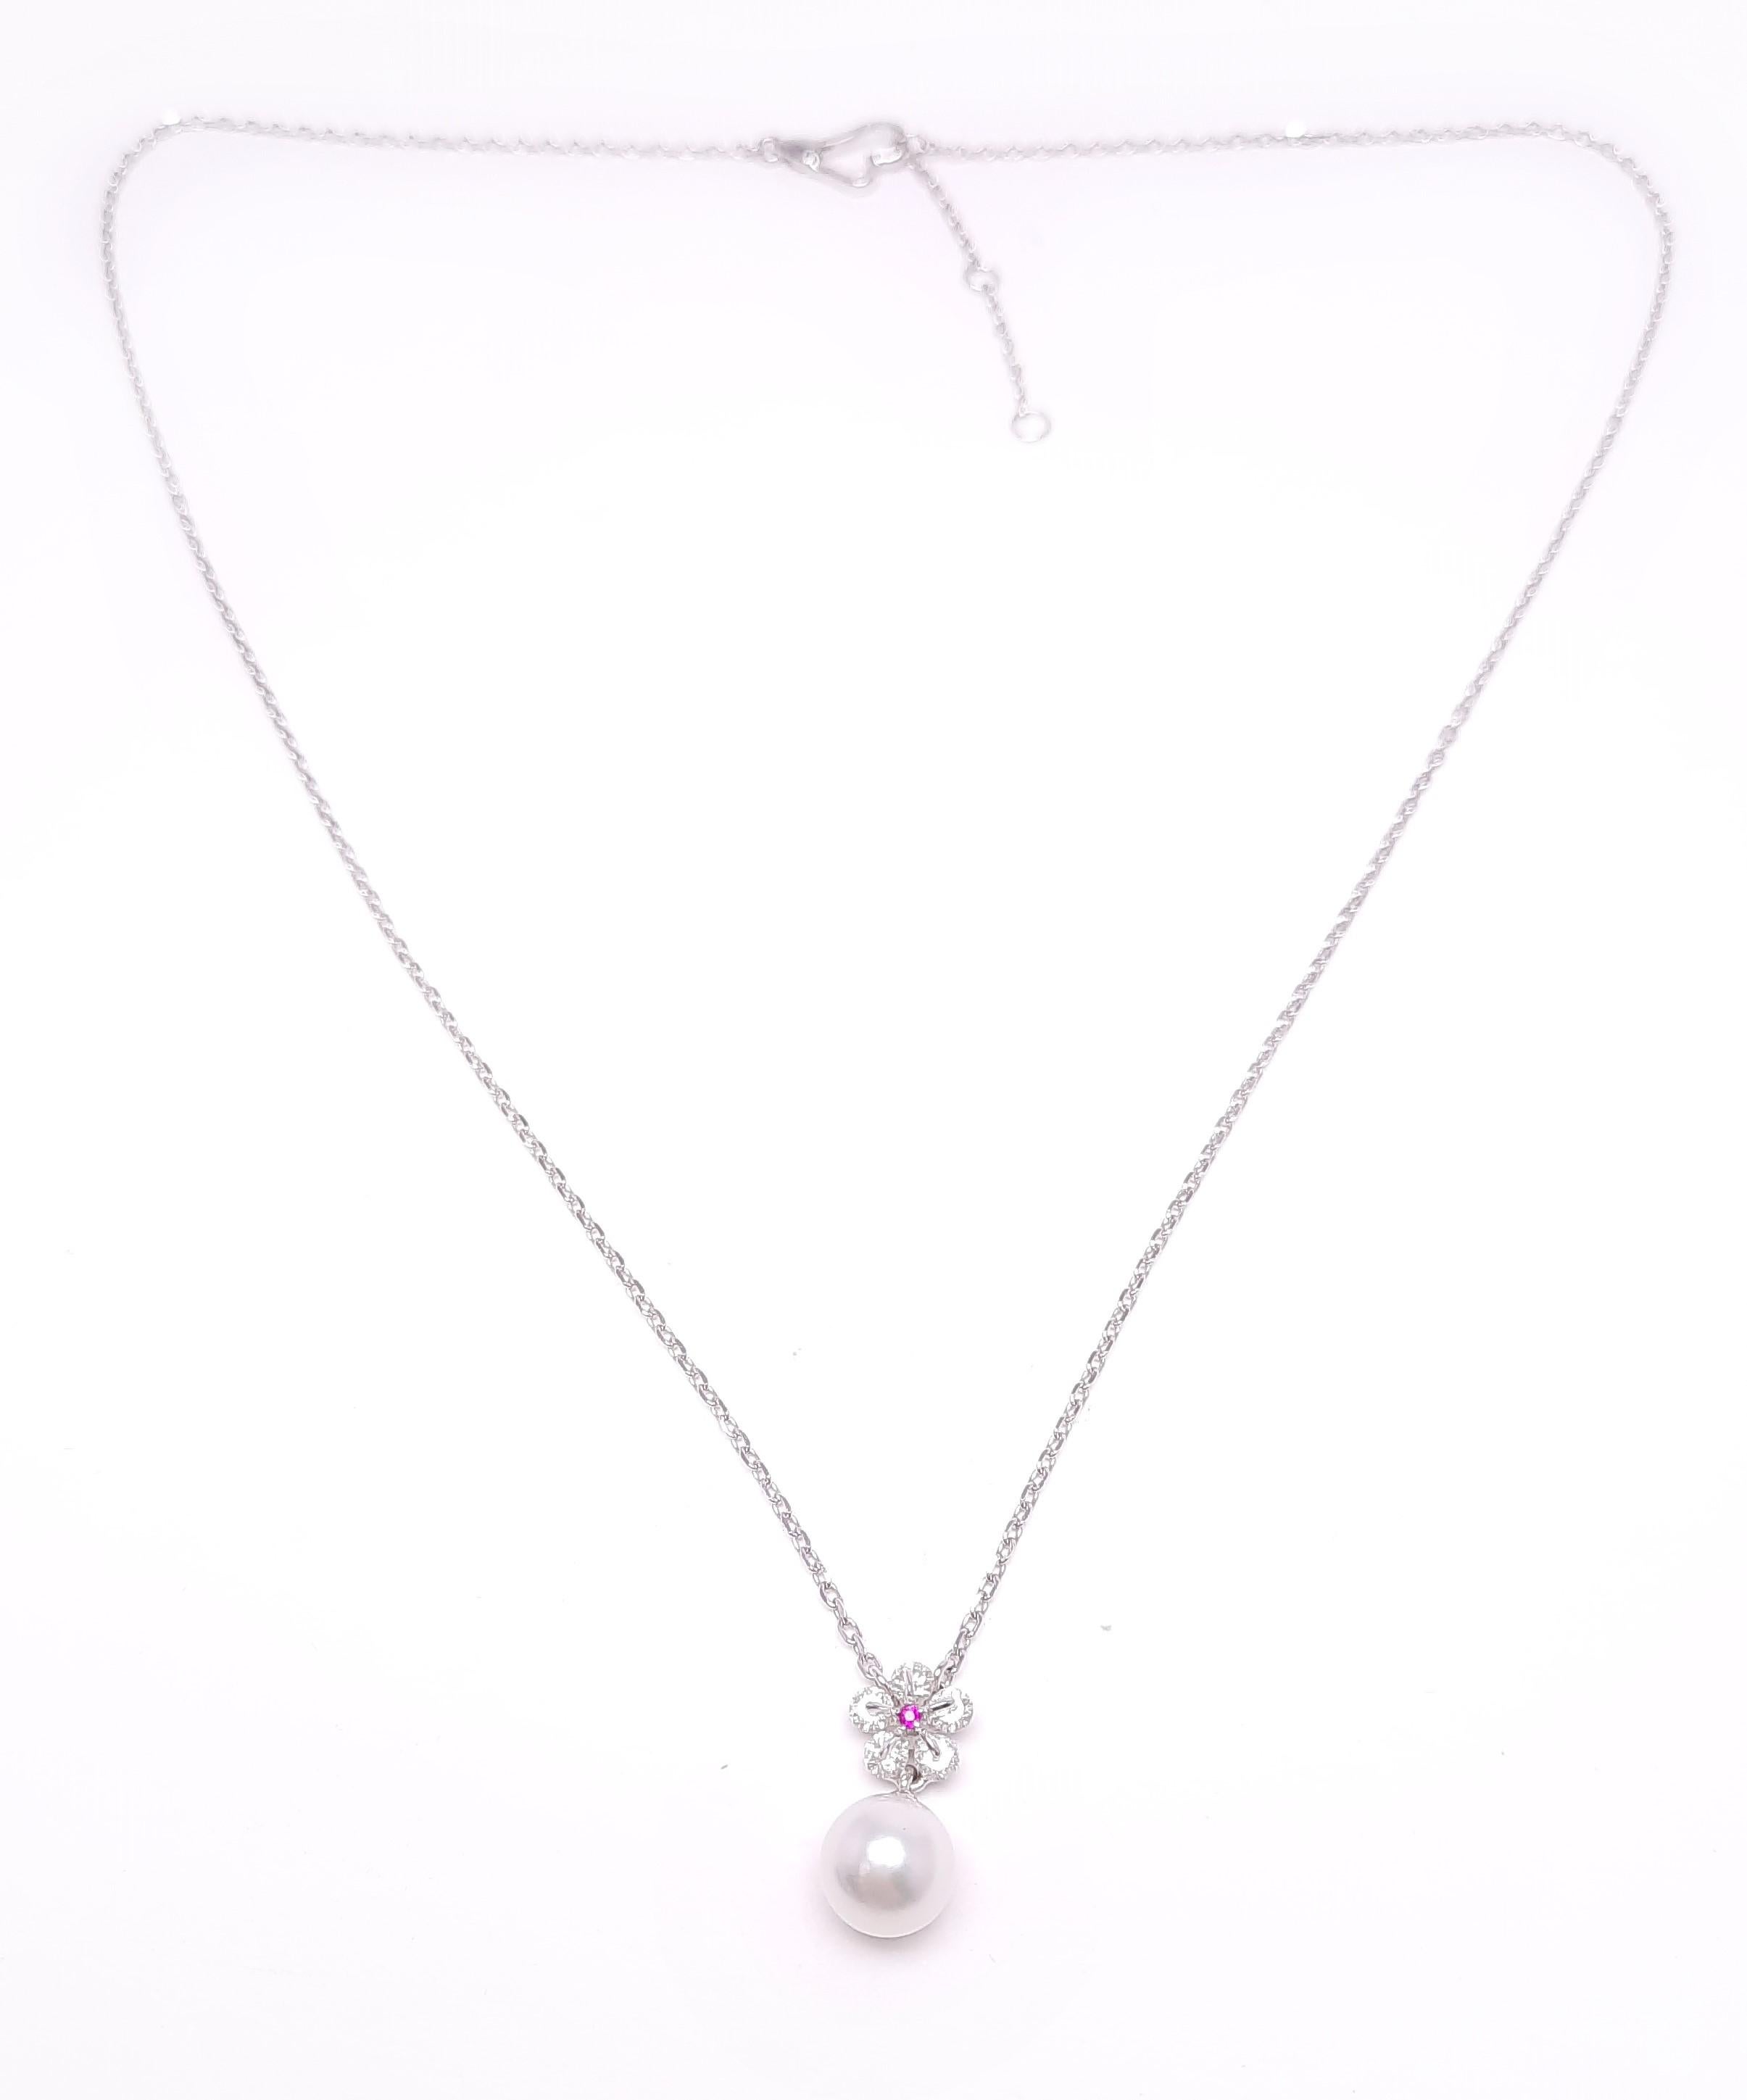 japan white gold necklace